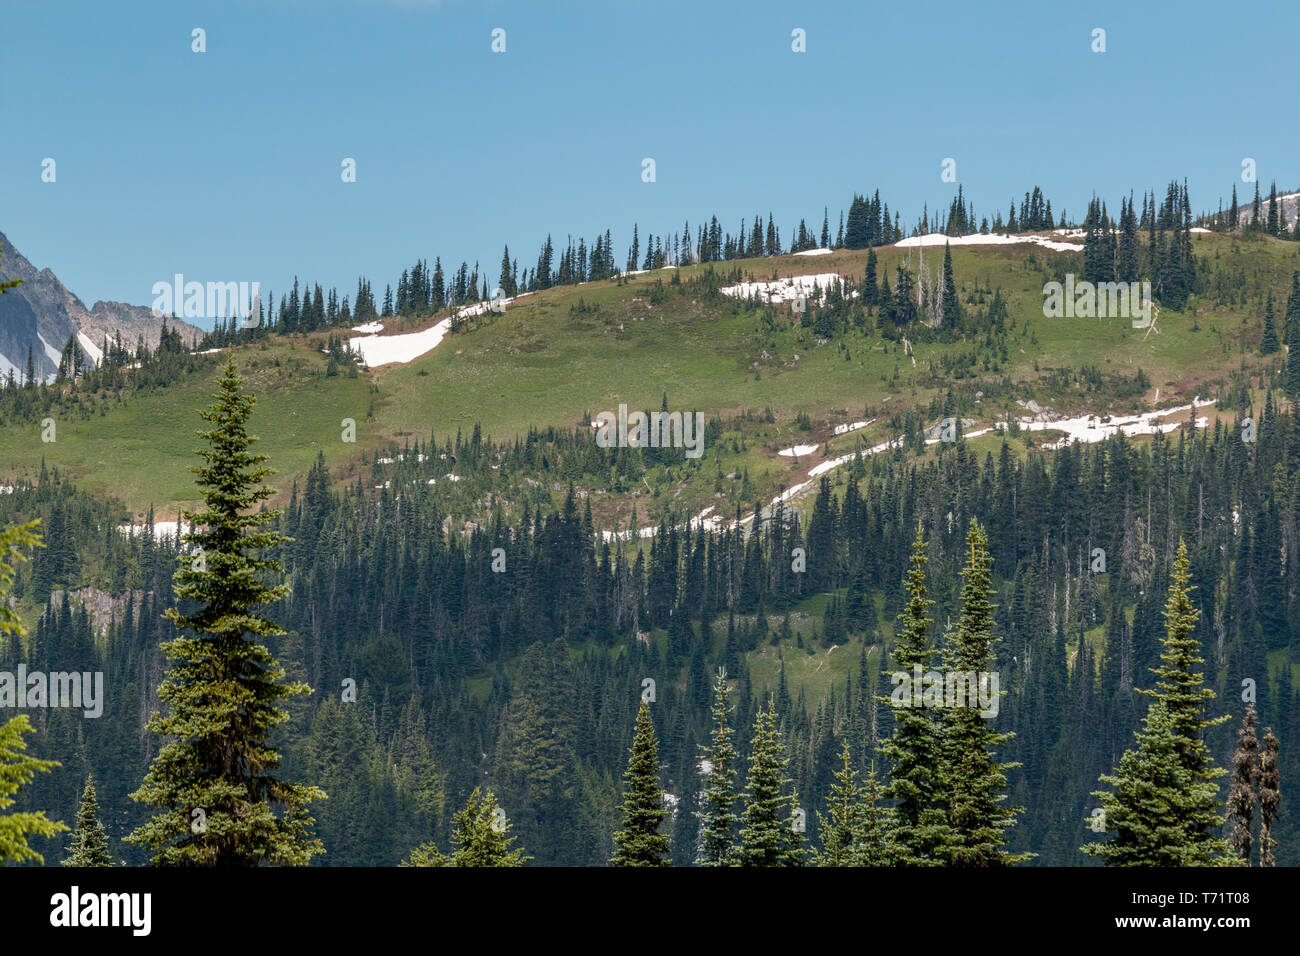 Evergreen trees grow large against mountain views in Mt Rainier National Park in Washington state. Stock Photo